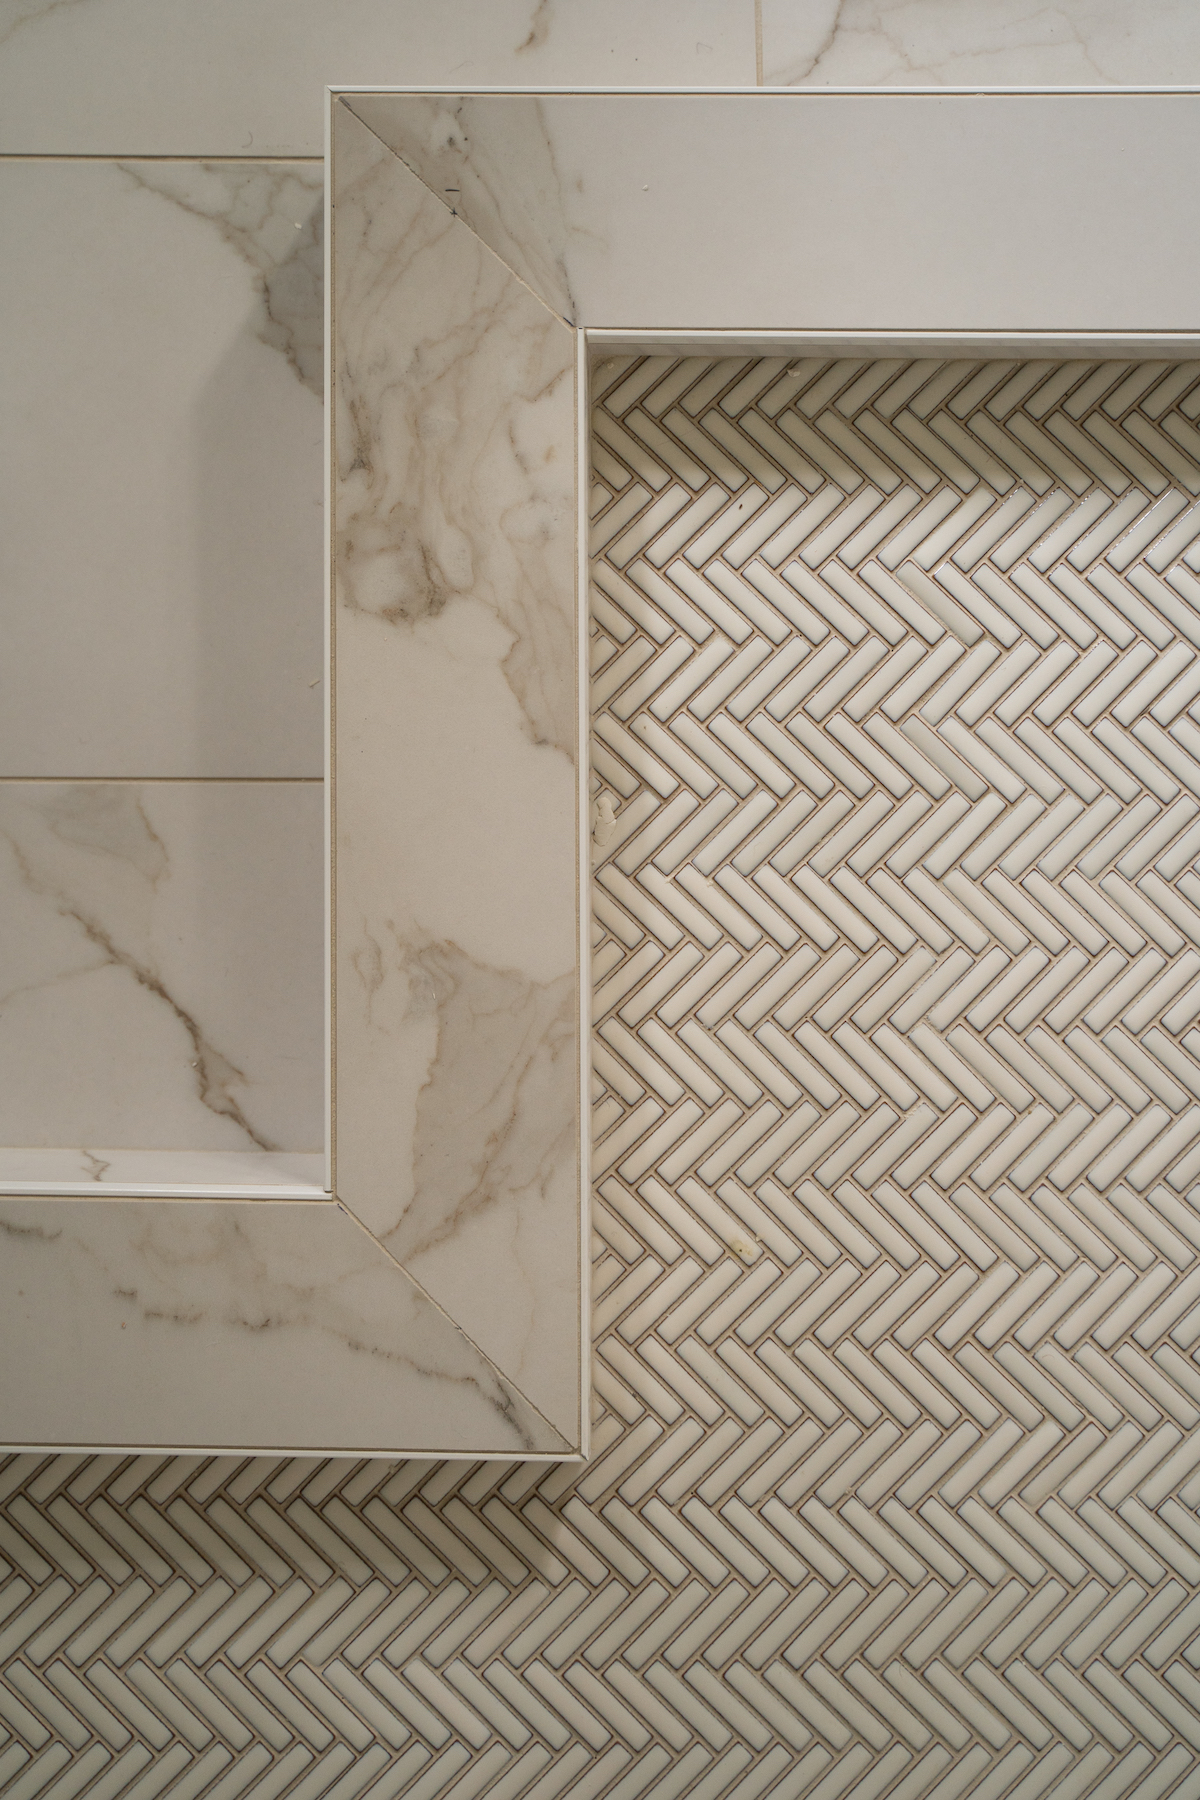 close up image of marbled shower tile next to chevron tile